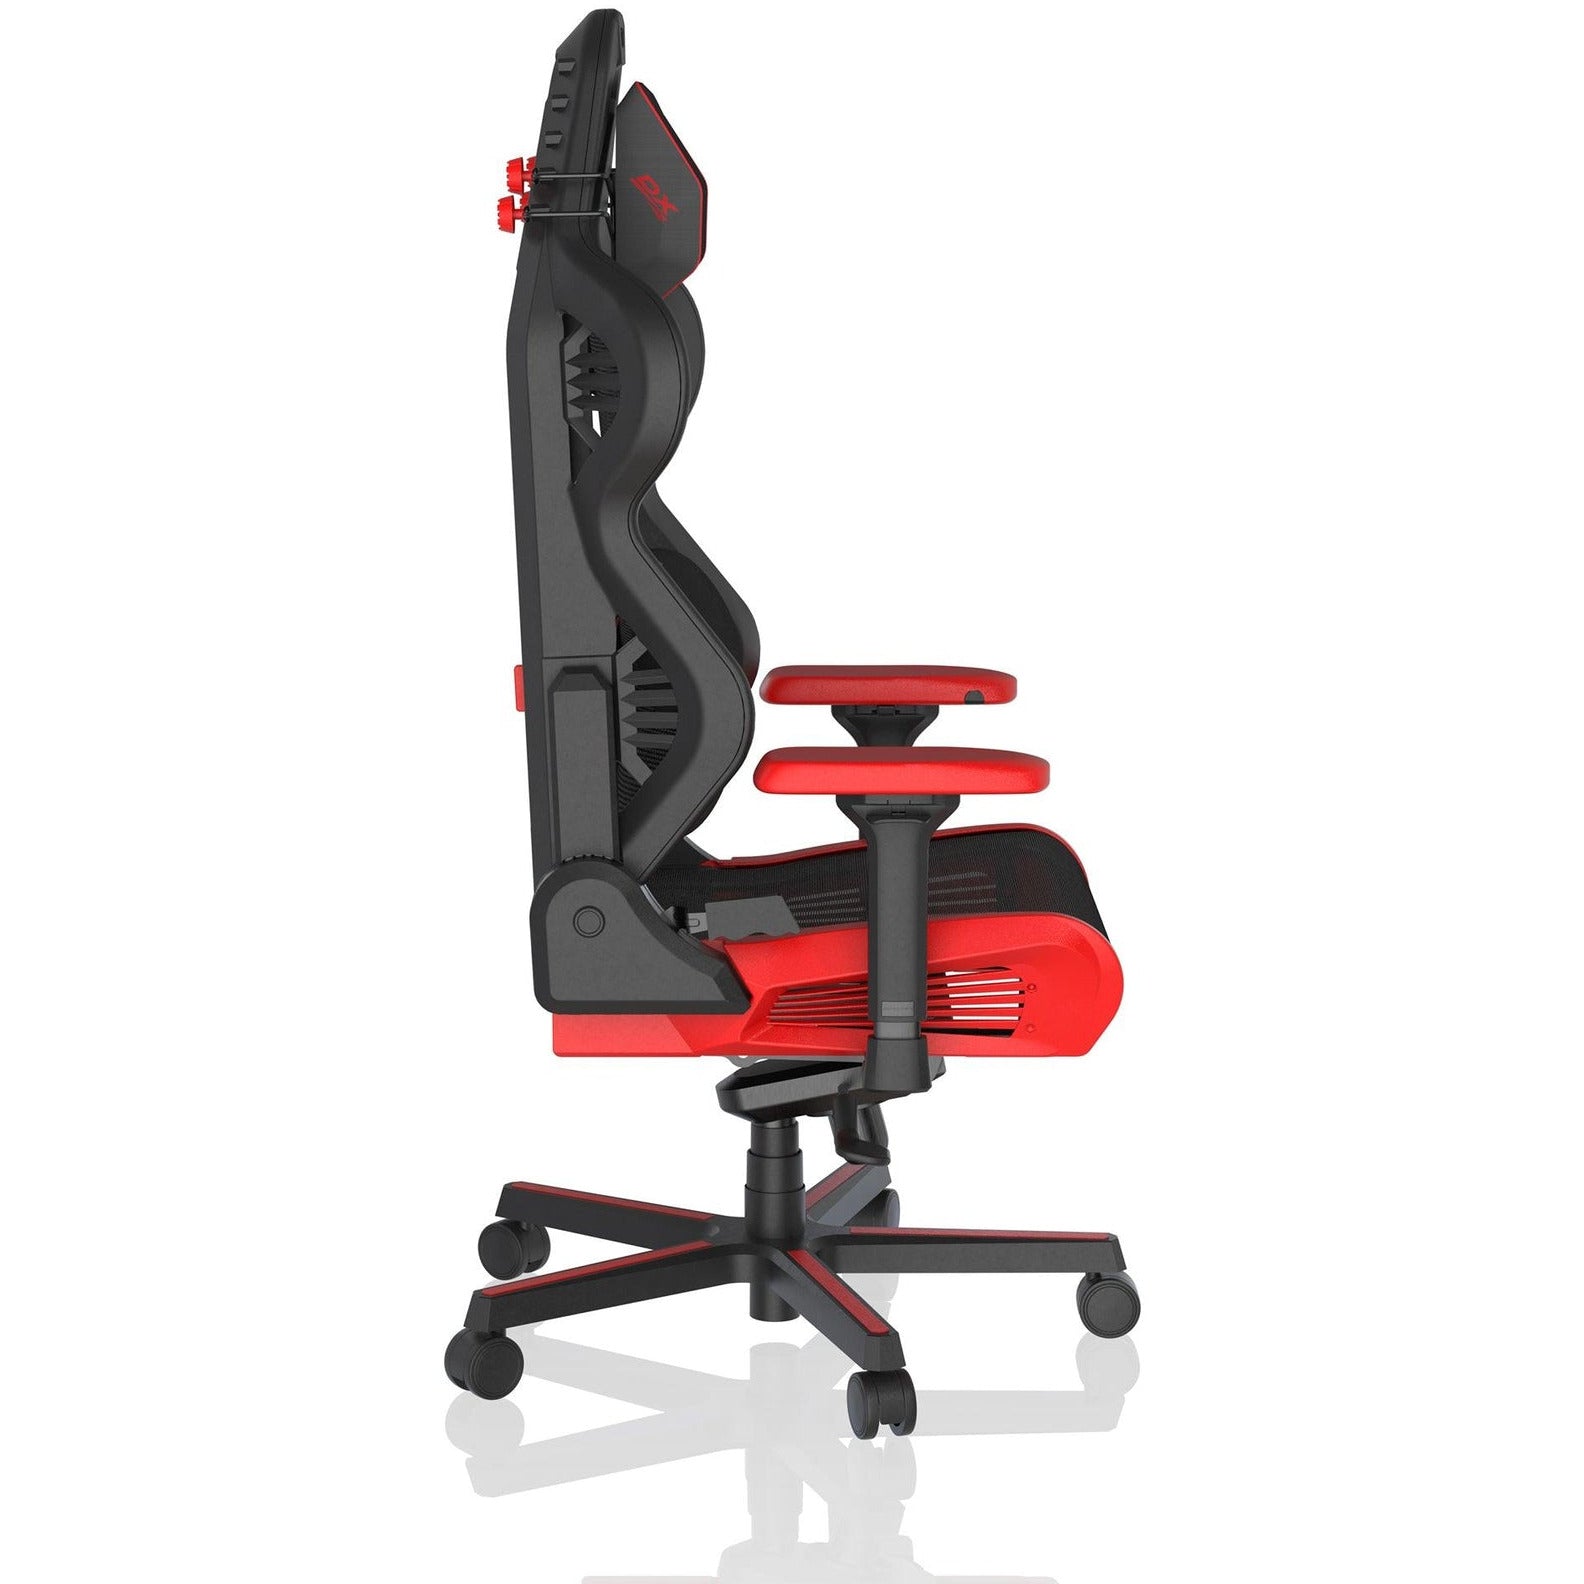 DXRacer Air Pro Mesh Red and Black Gaming Chair